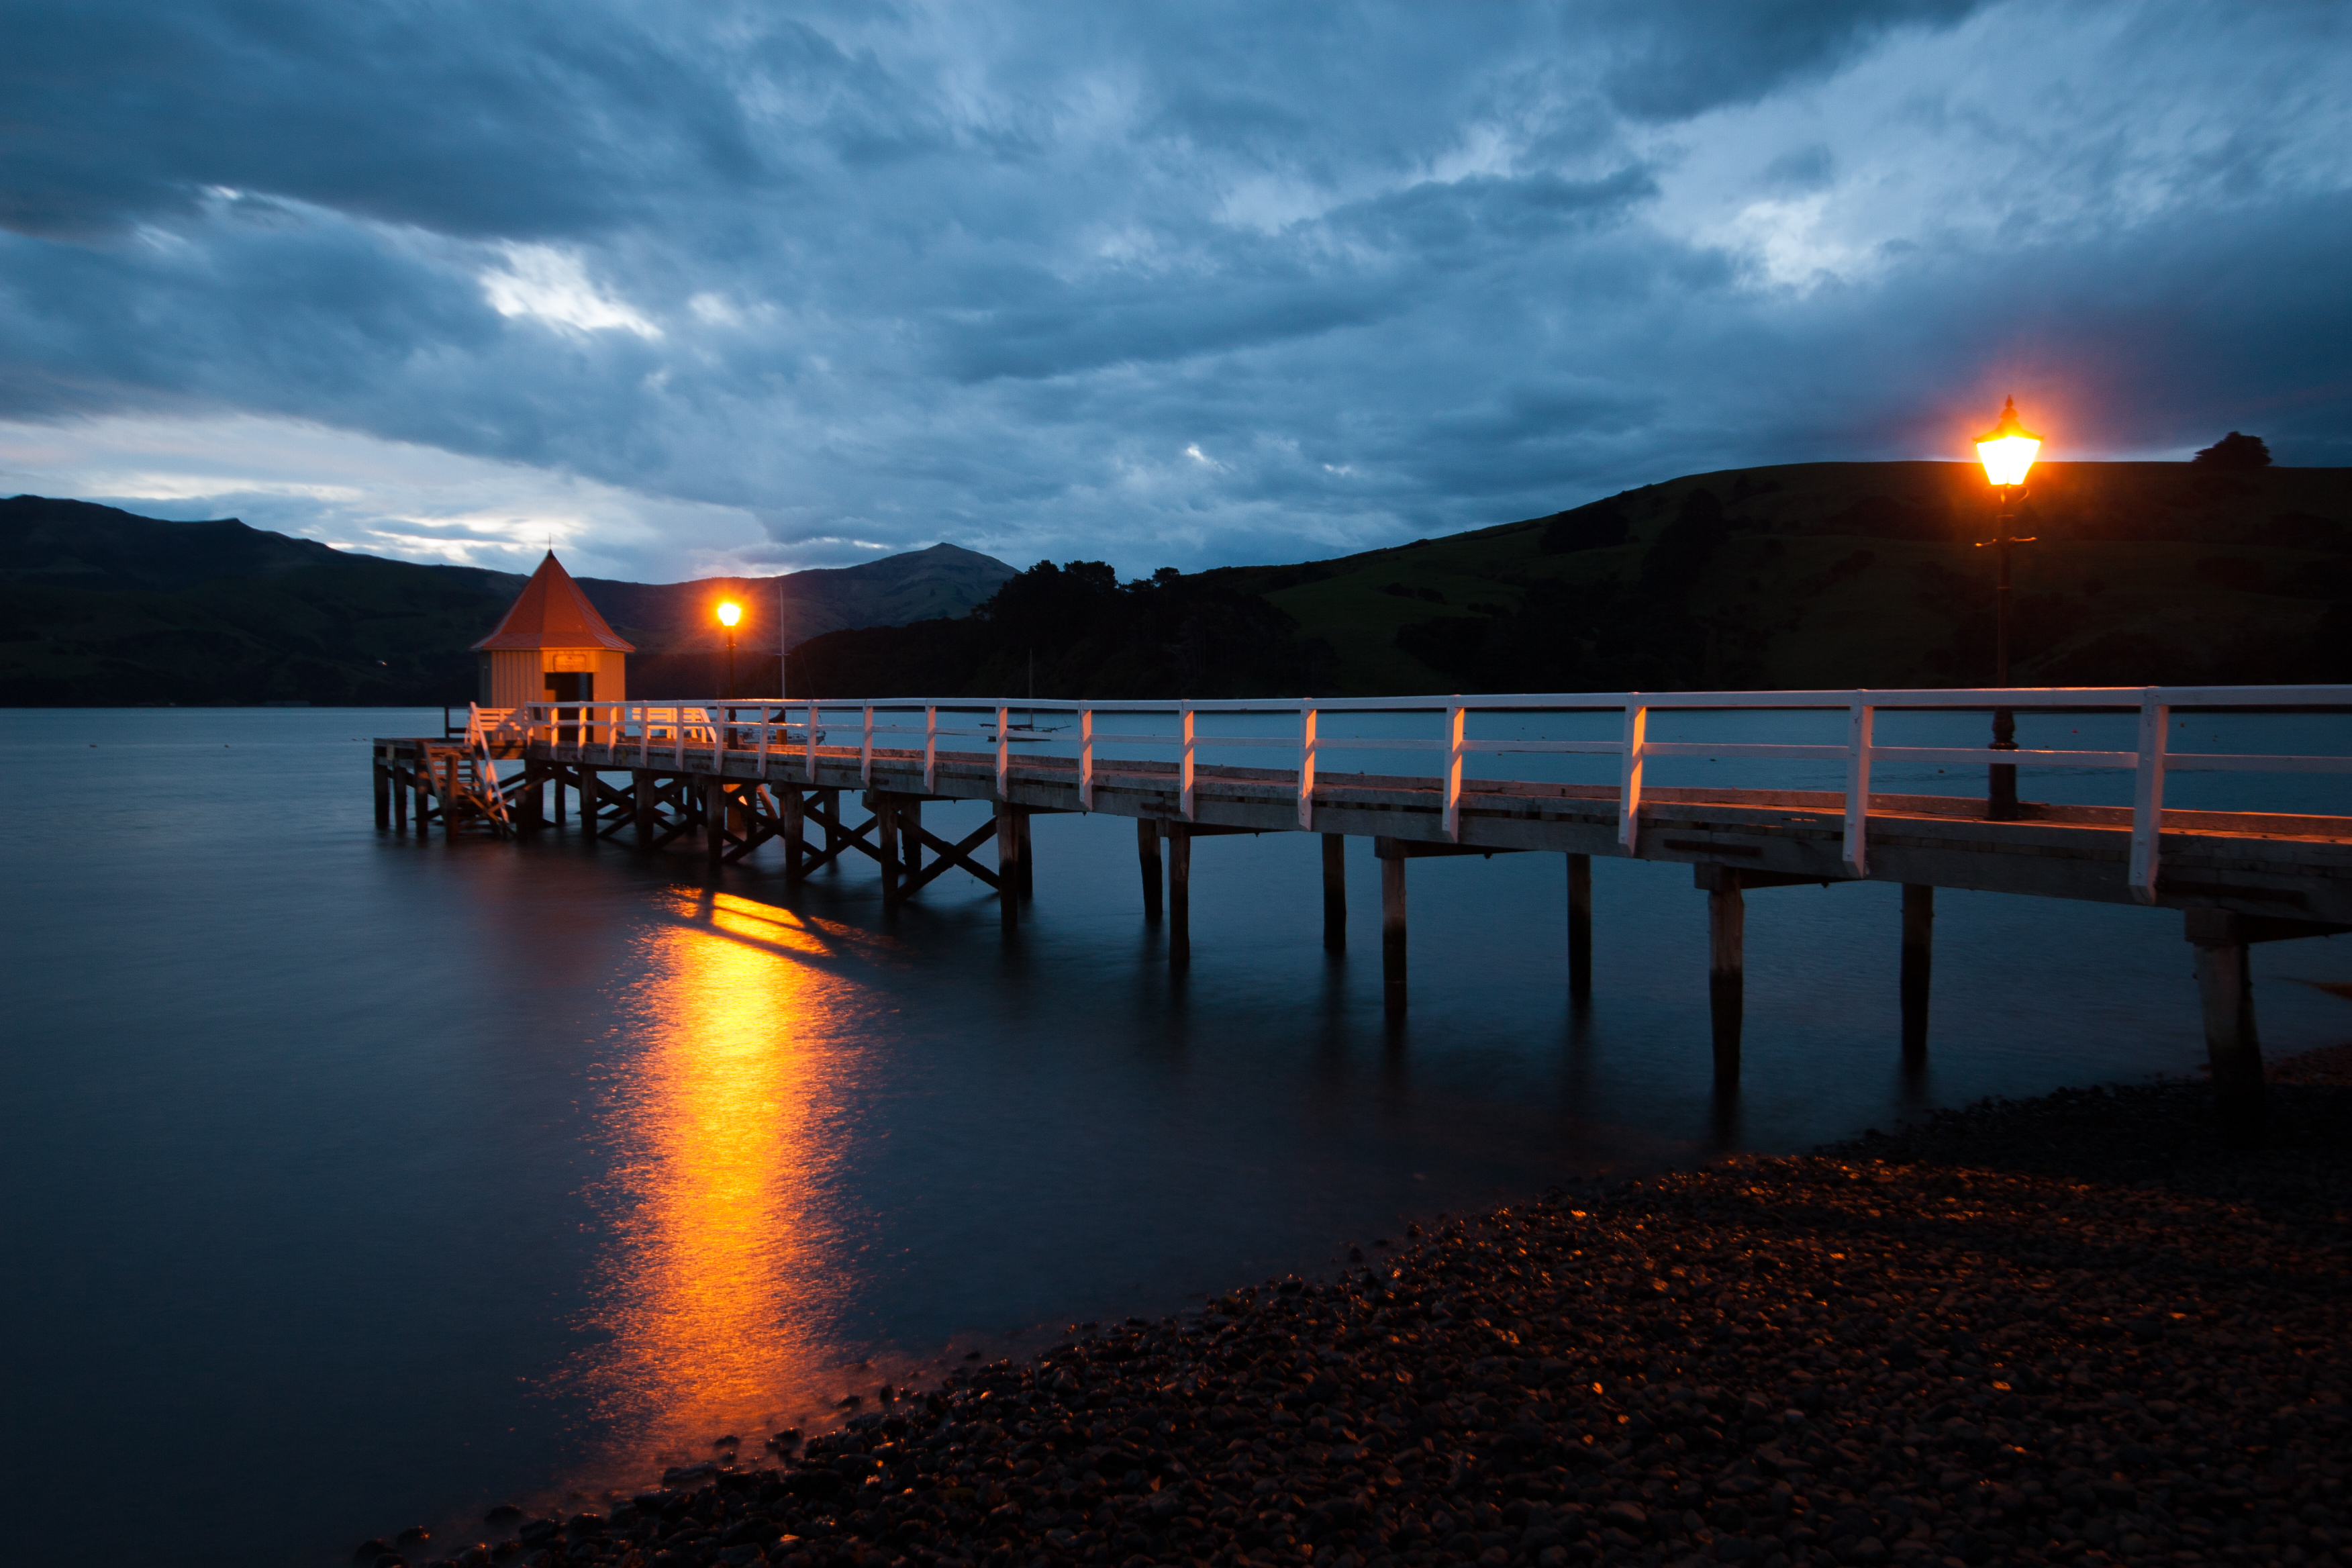 pier or jetty in Akaroa, canterbury, new zealand at night with reflection on water